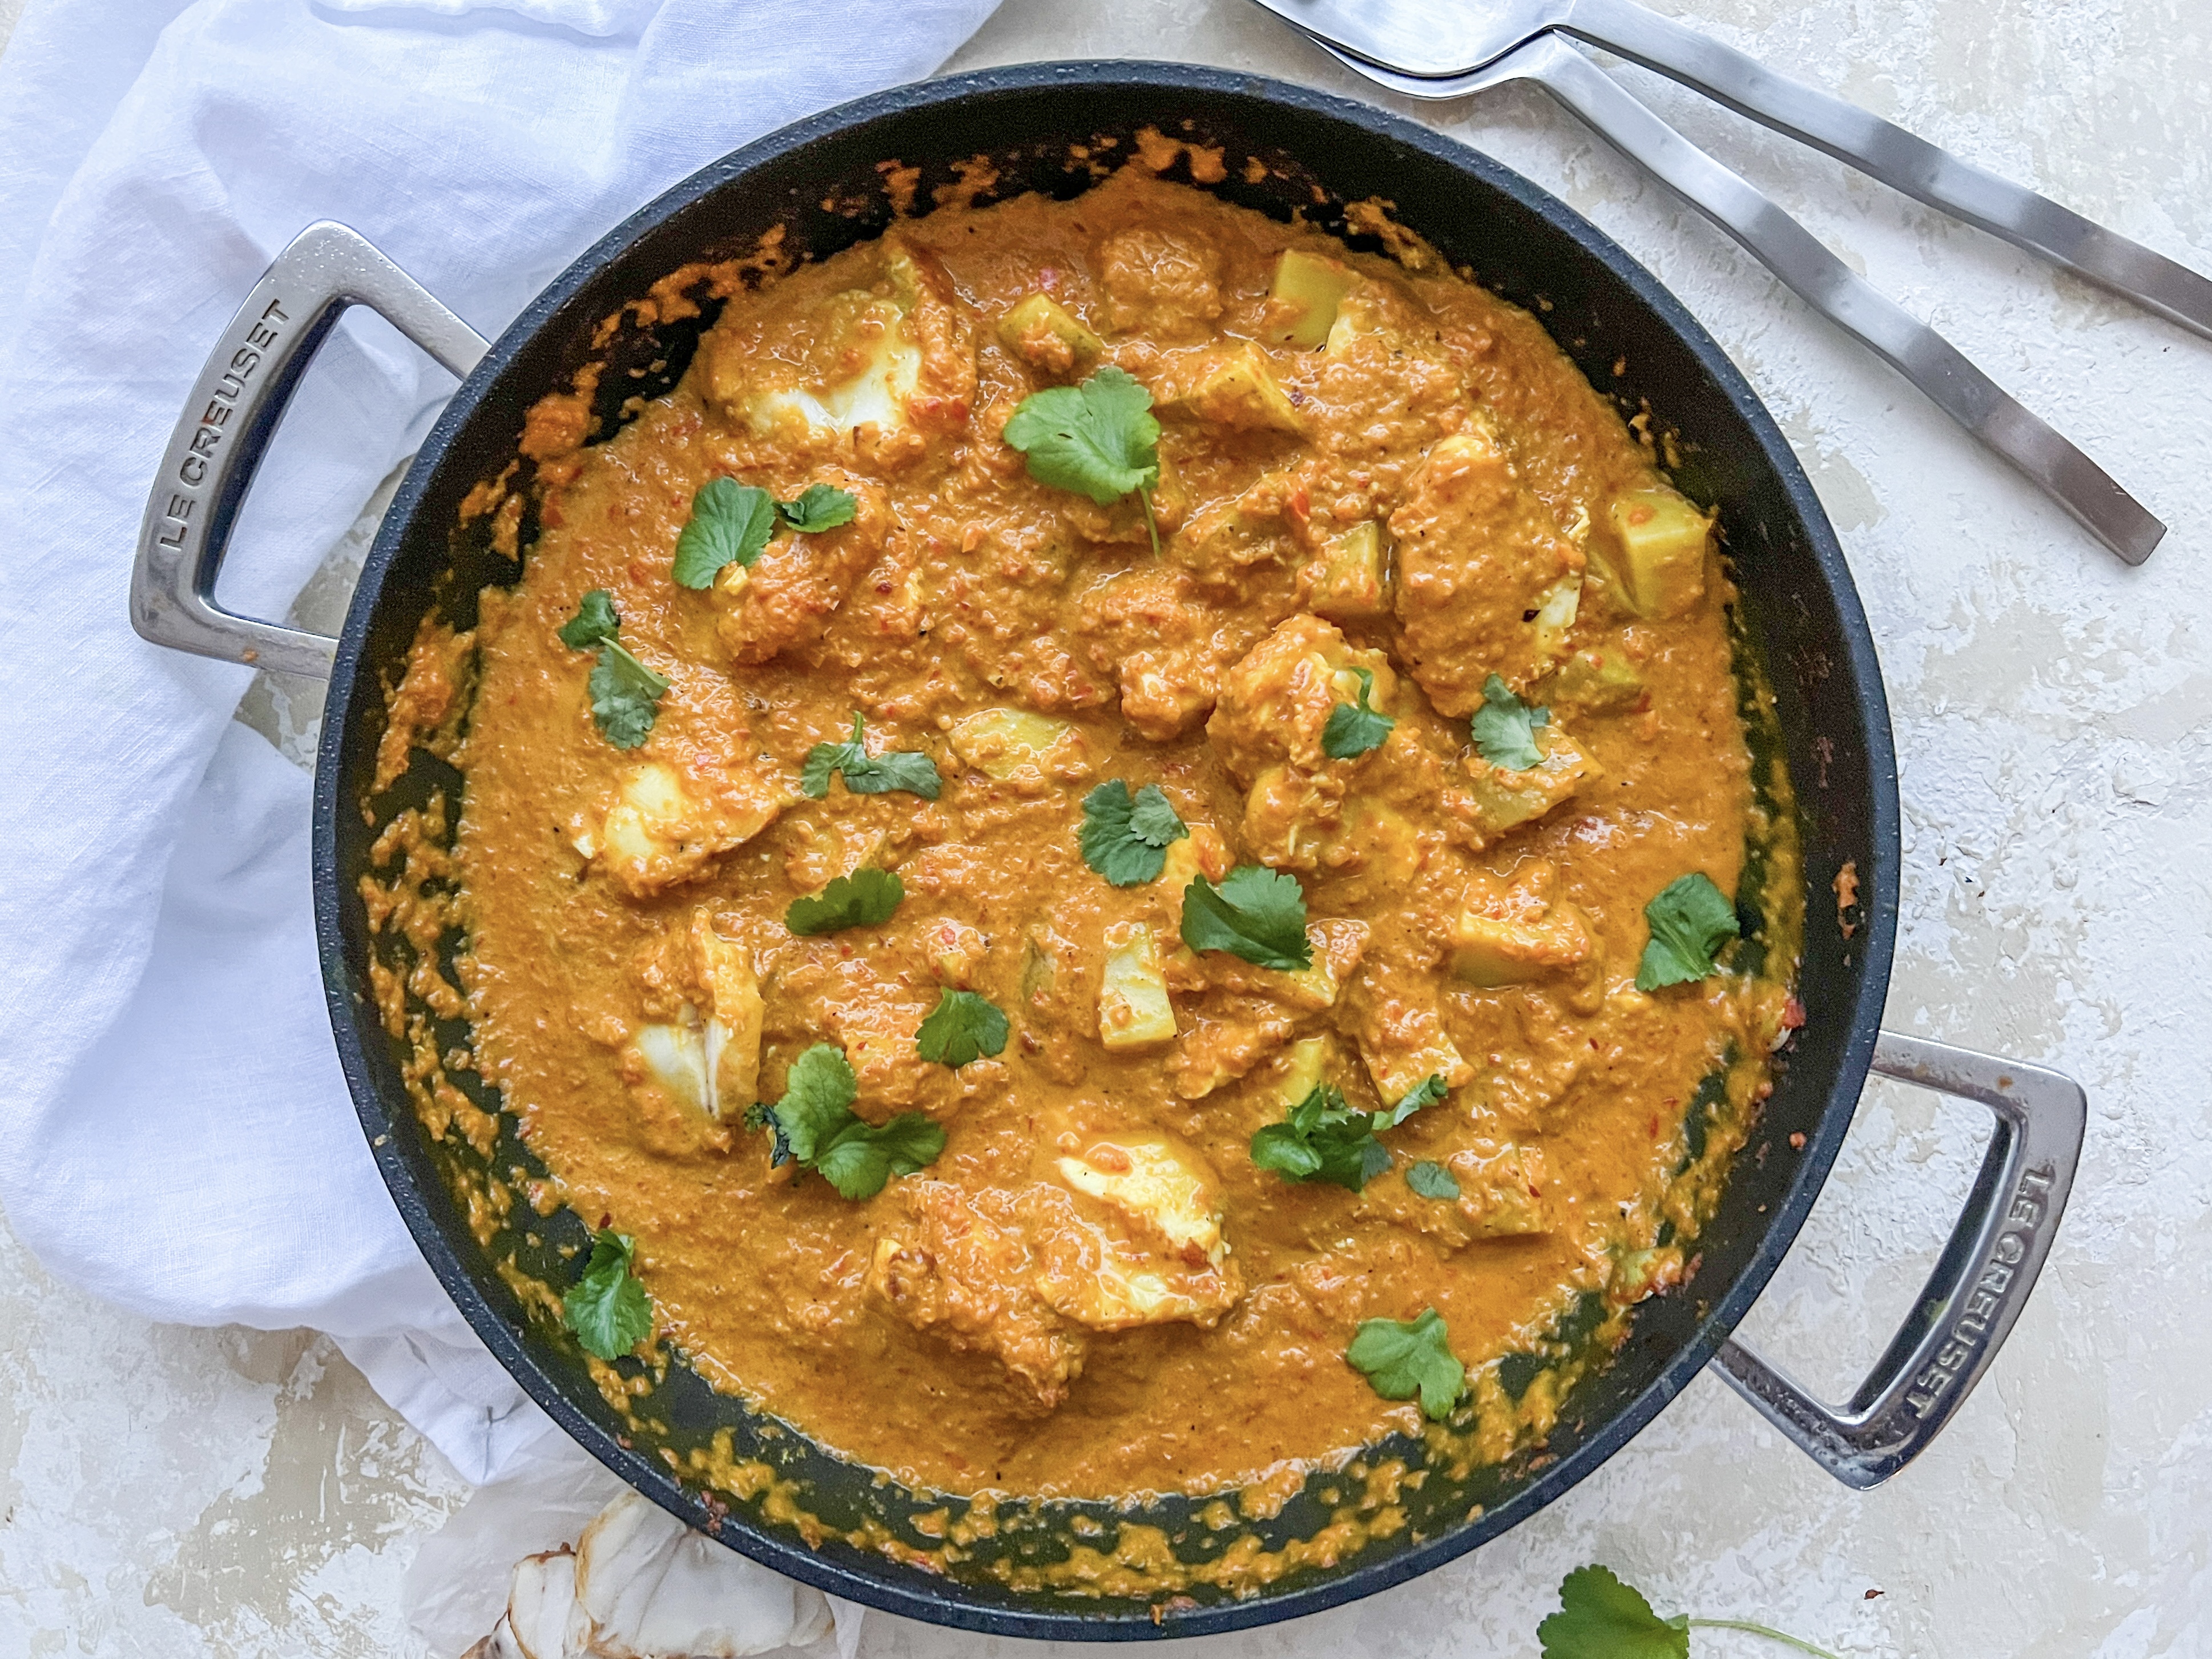 Photograph of Belizean Monkfish Curry or 'Poor Man's Lobster' Curry